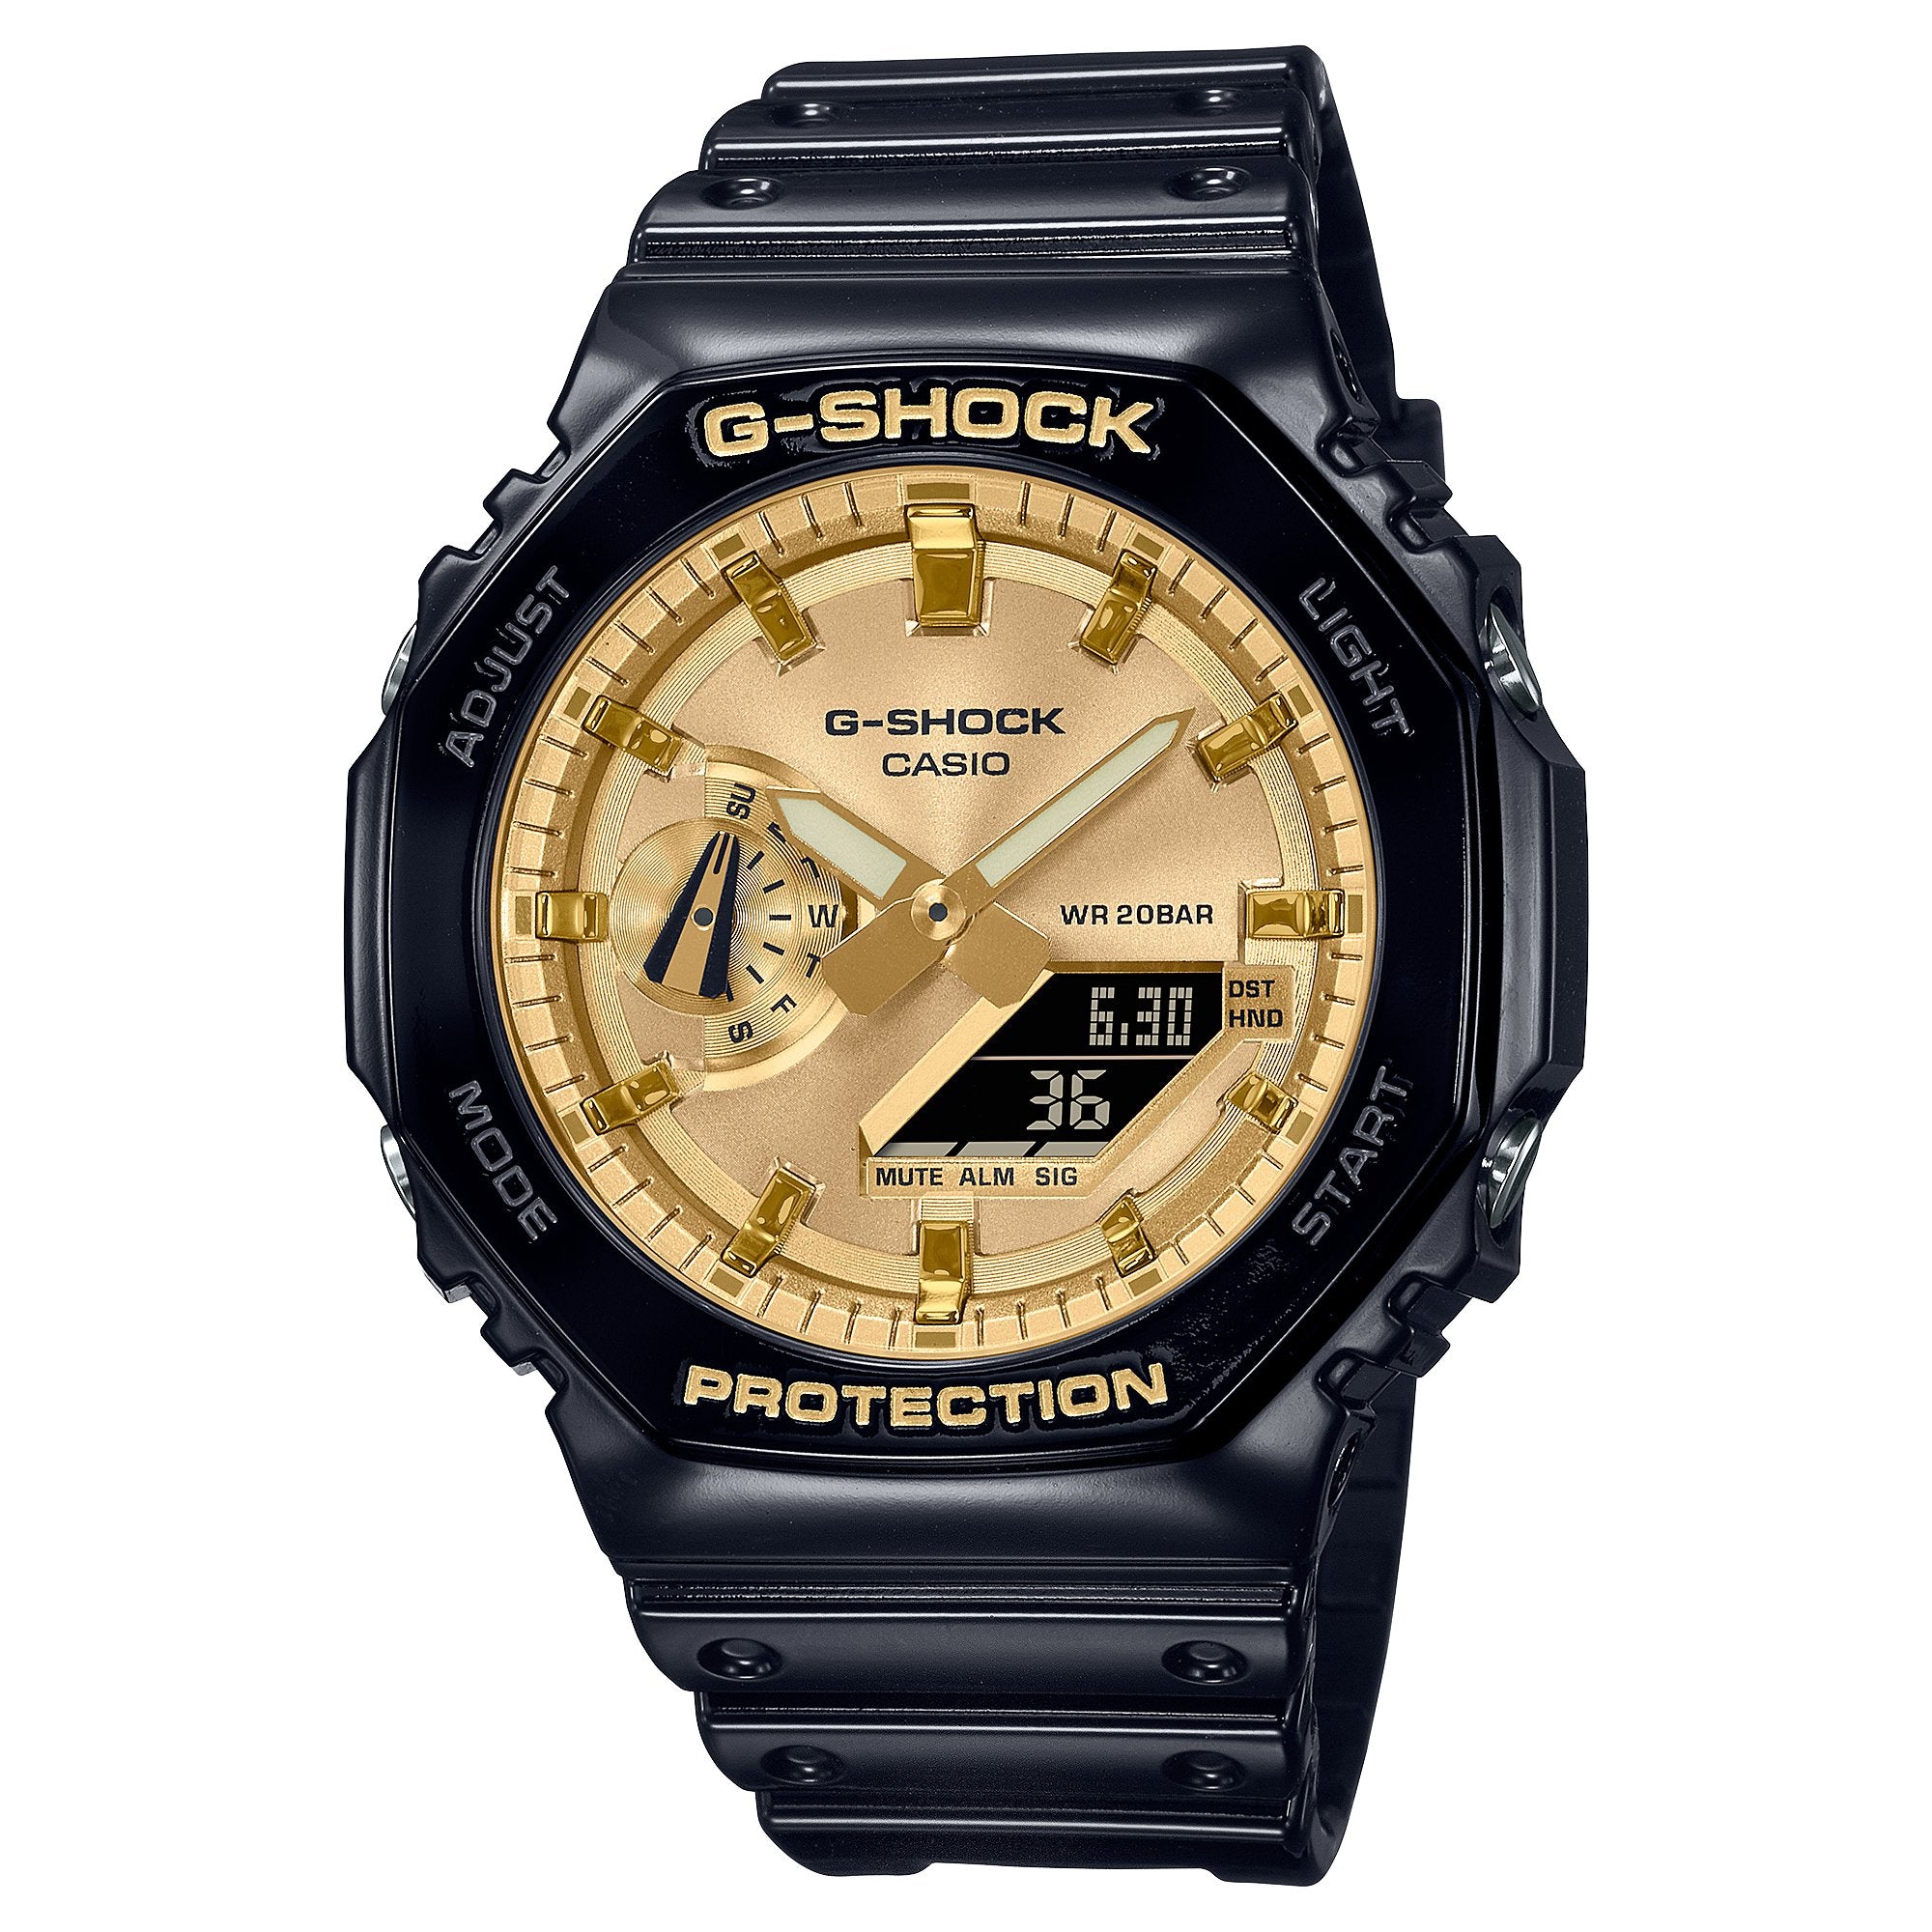 LF20W-1A, G-SHOCK Digital Watch, Stylish and Resilient